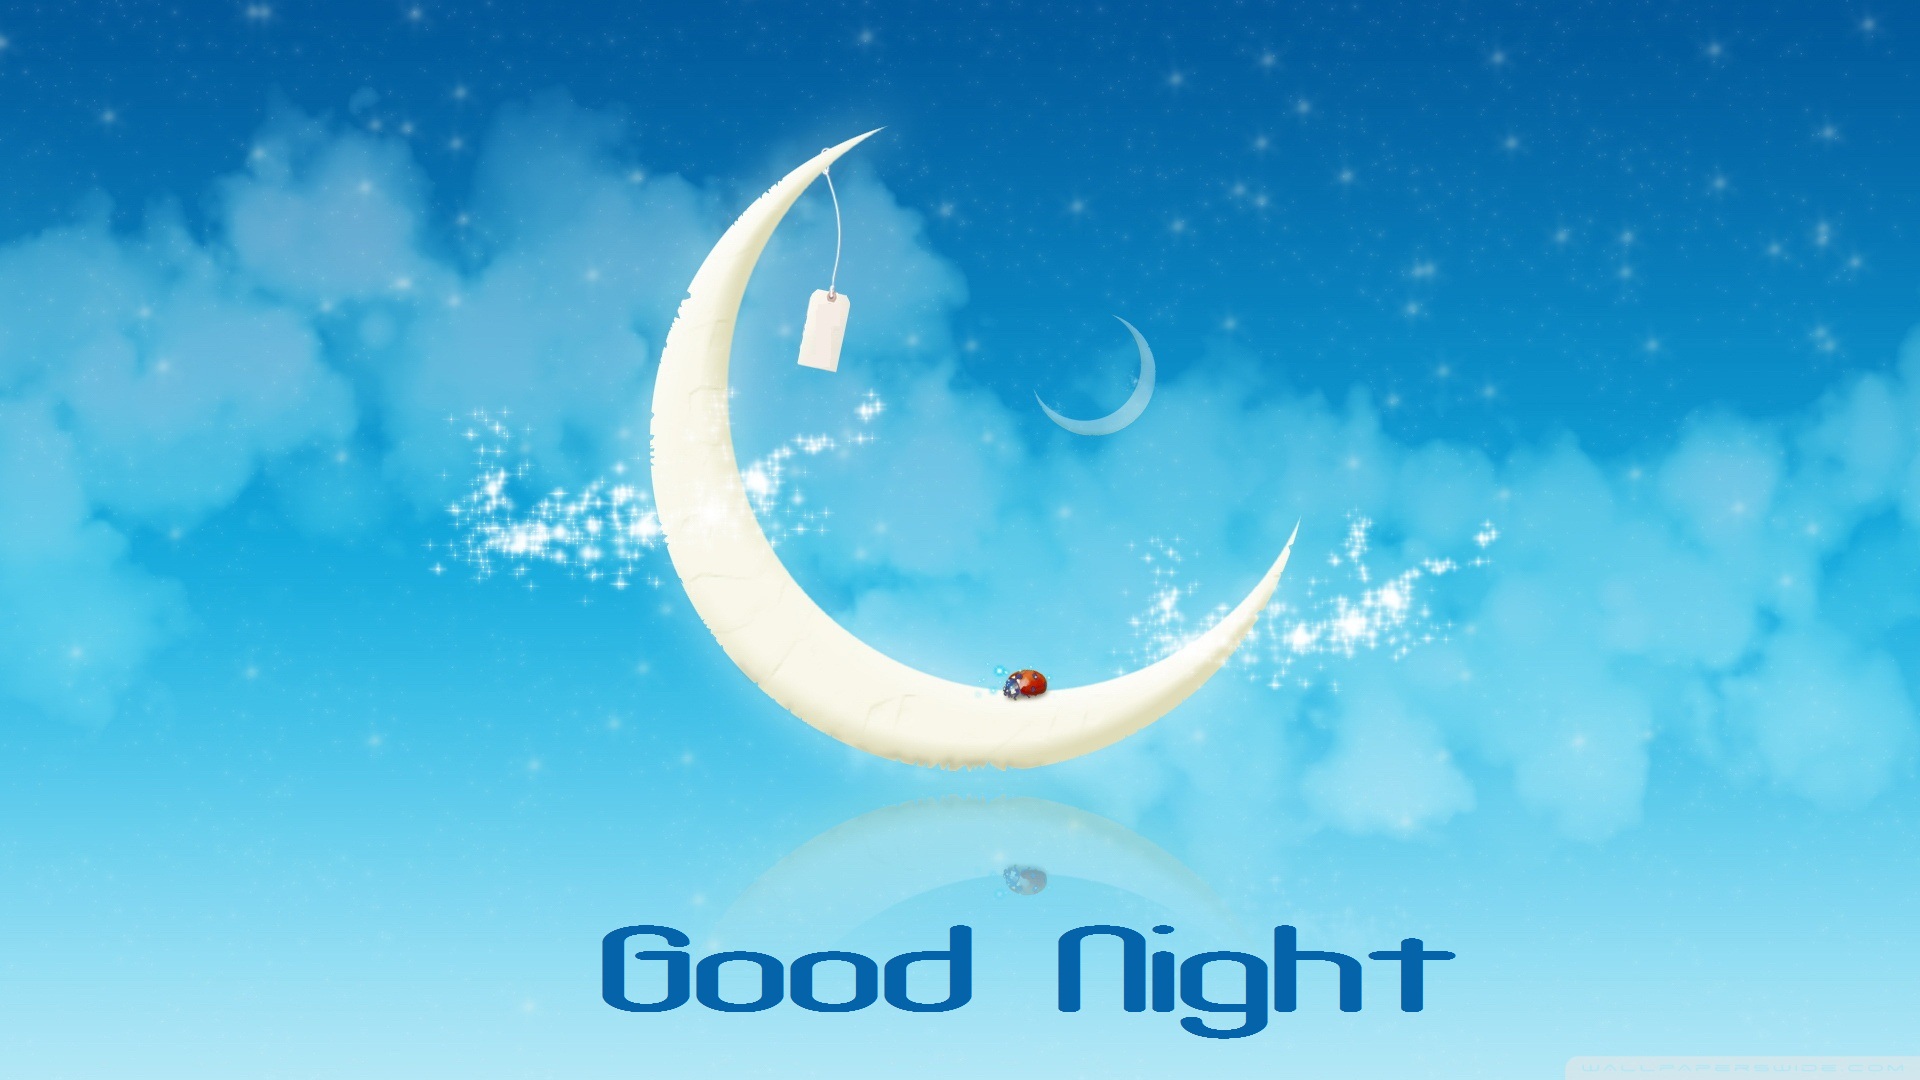 good night wallpaper free download,sky,crescent,daytime,text,atmosphere